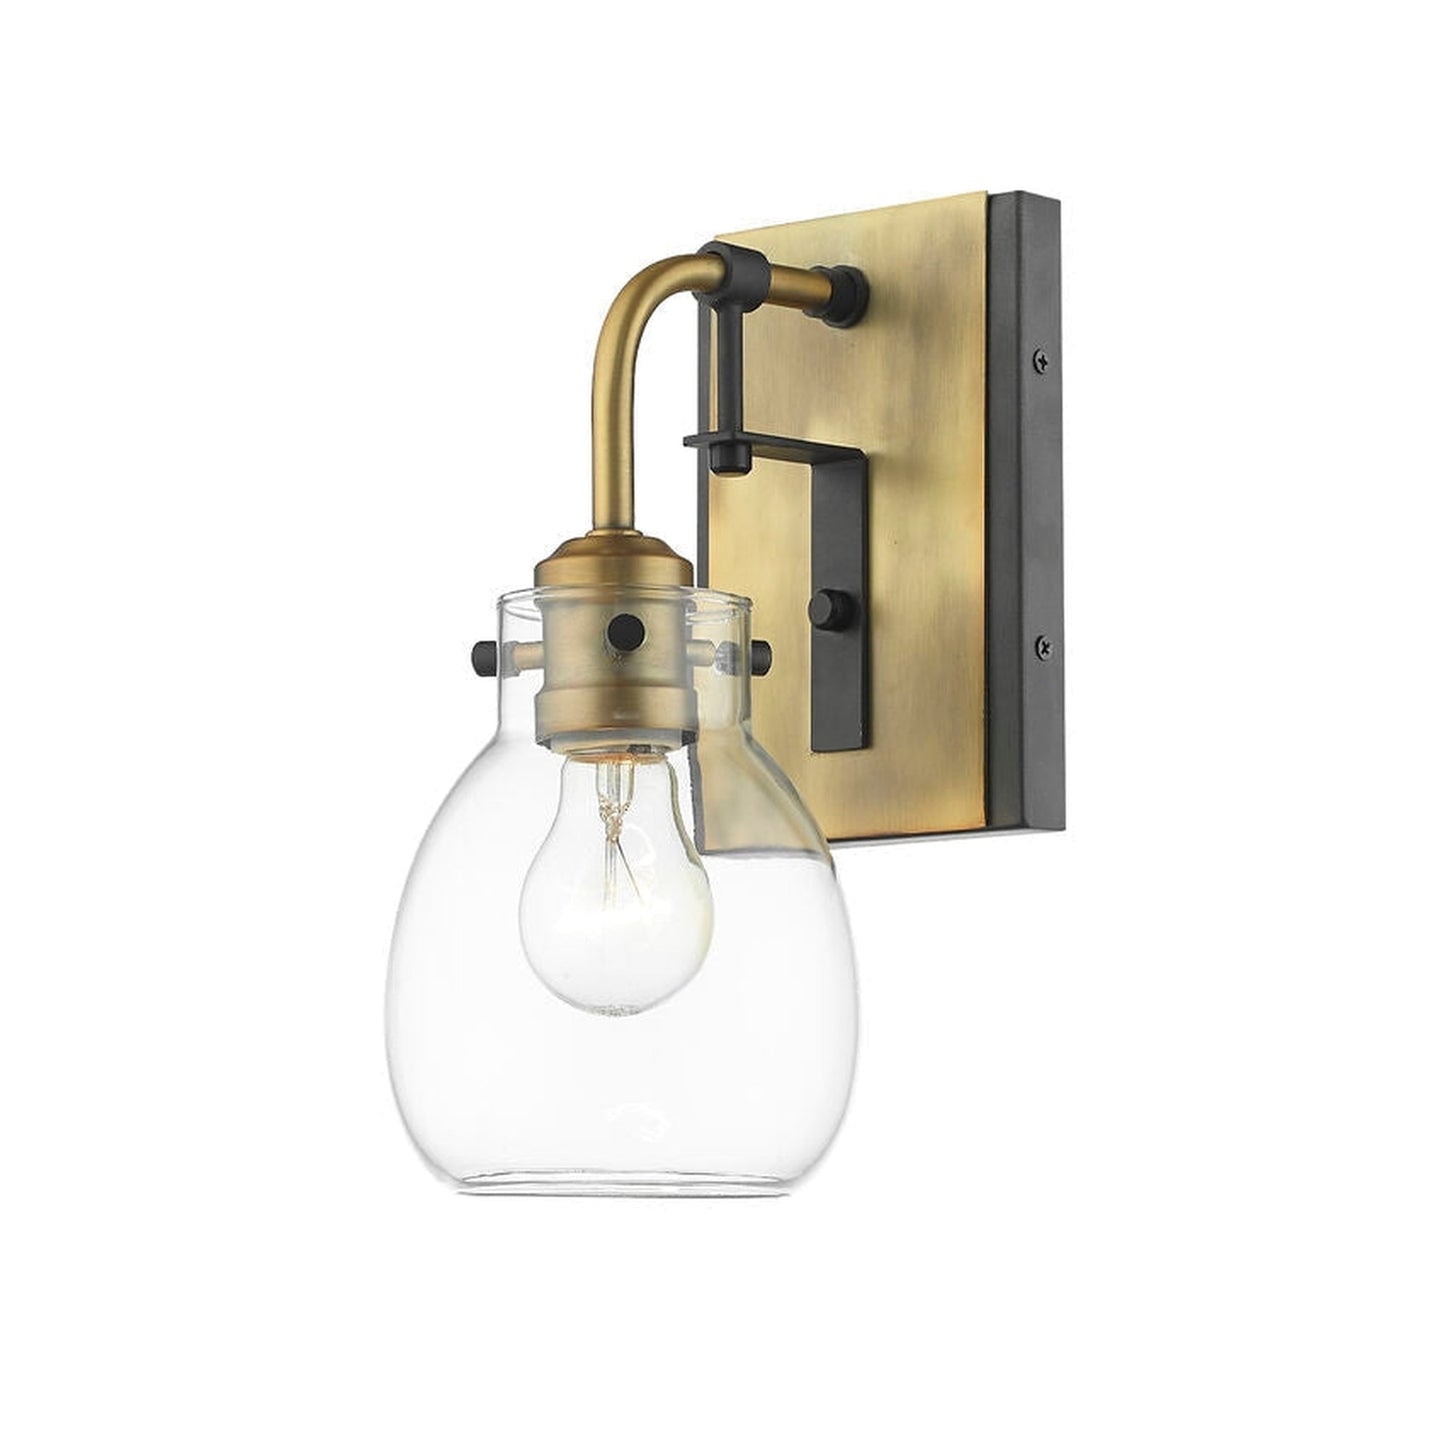 Z-Lite Kraken 5" 1-Light Matte Black and Olde Brass Wall Sconce With Clear Glass Shade